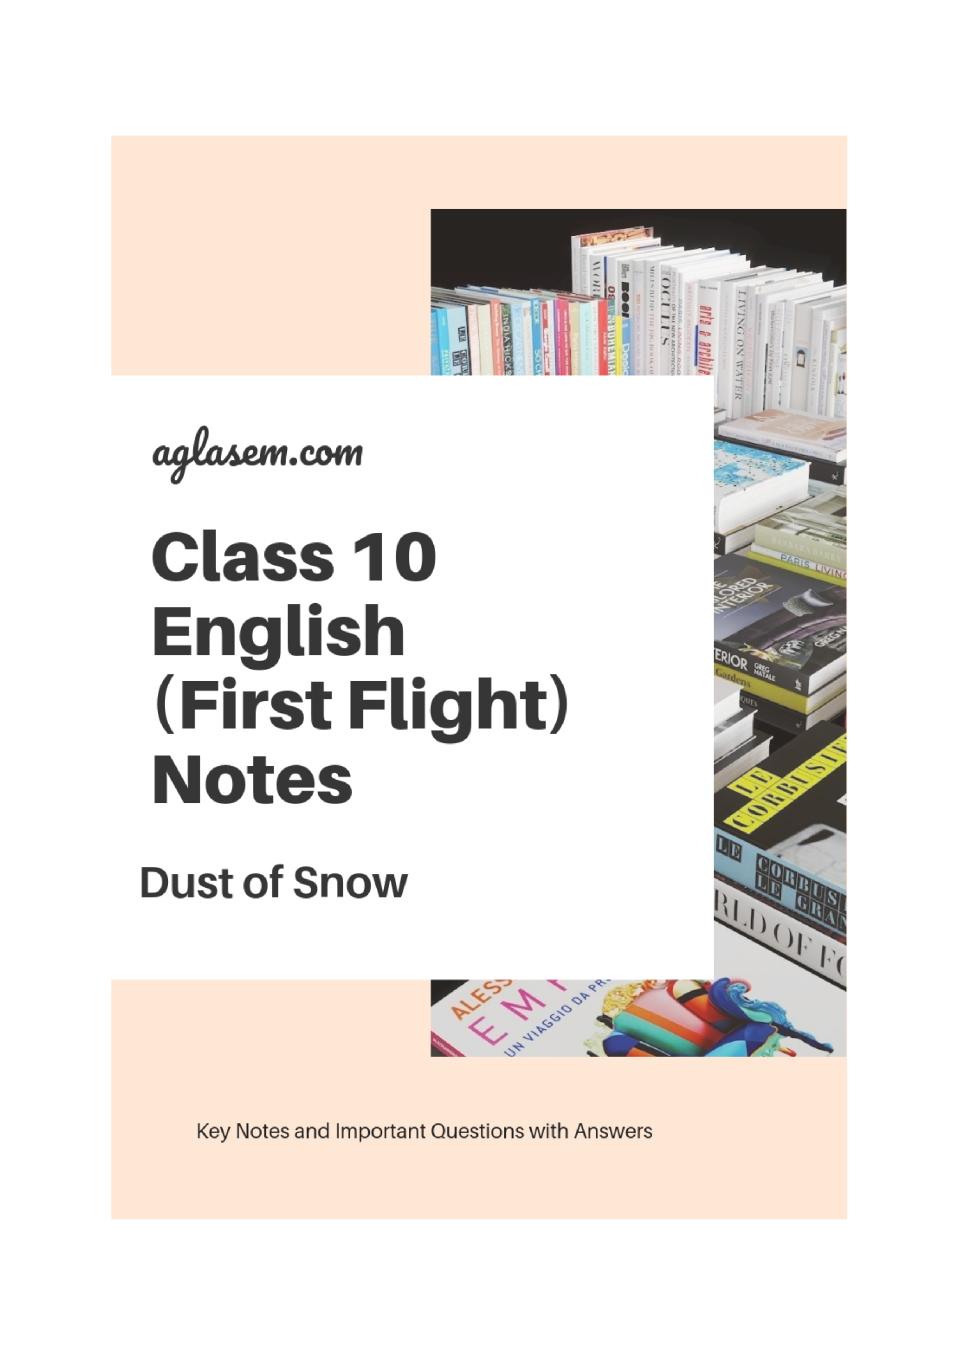 Class 10 English First Flight Notes For Dust of Snow - Page 1